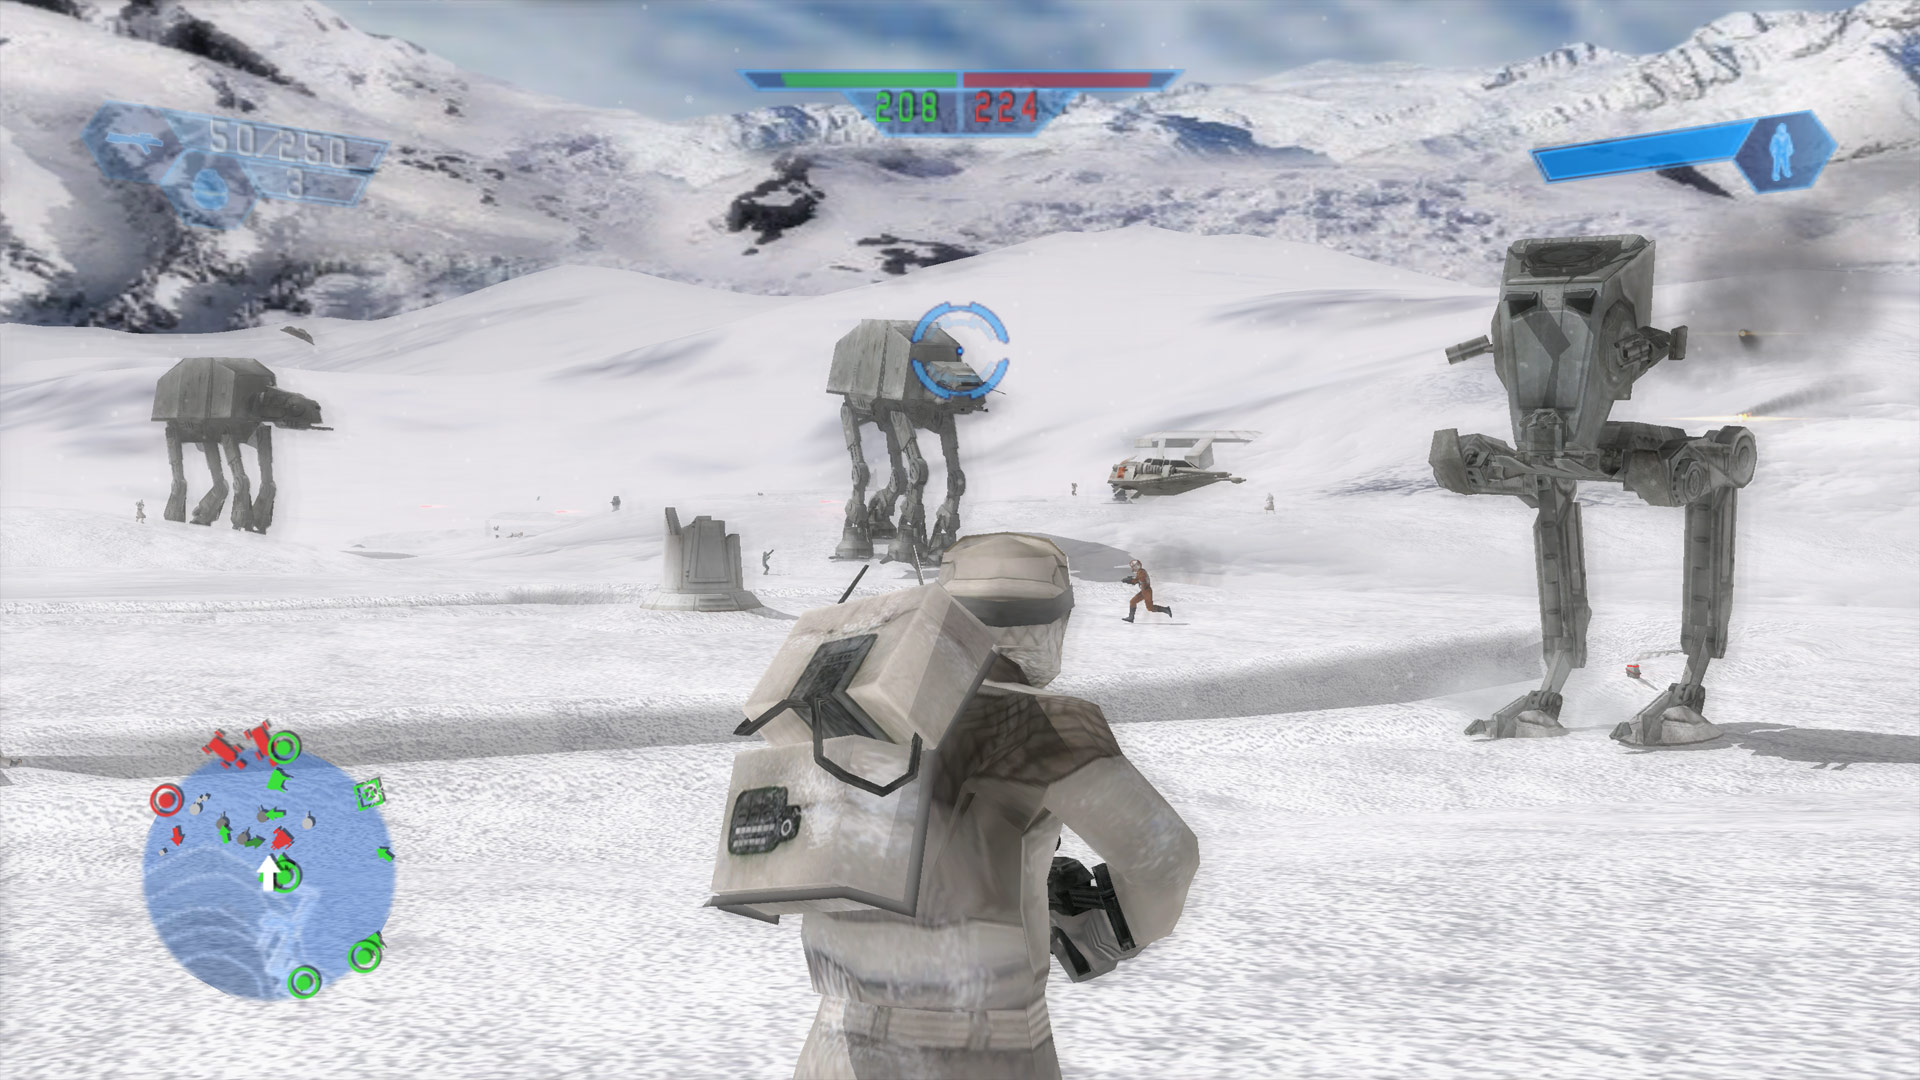 Star wars battlefront classic collection купить. Star Wars Battlefront (Classic, 2004). Star Wars Battlefront Xbox. Батлфронт 1 2004. Star Wars Battlefront 1.